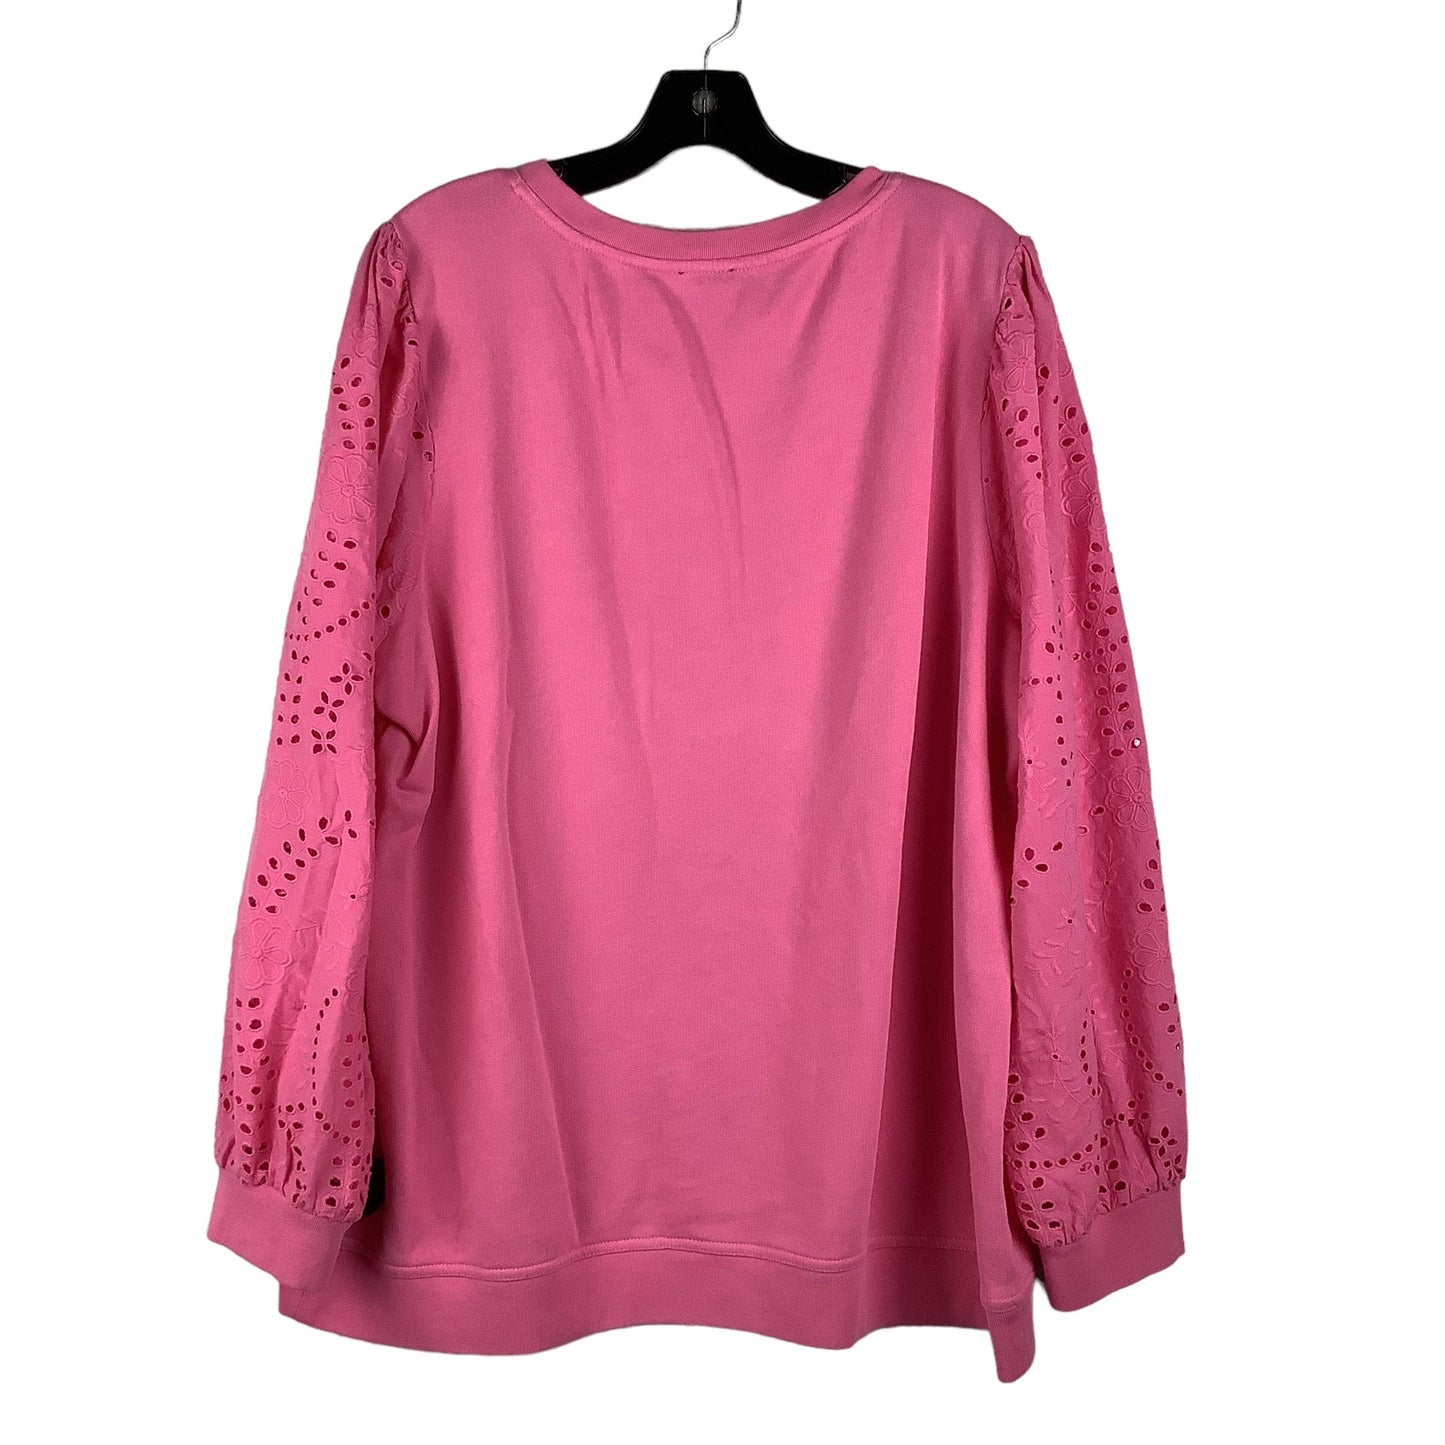 Pink Top Long Sleeve Talbots, Size 2x